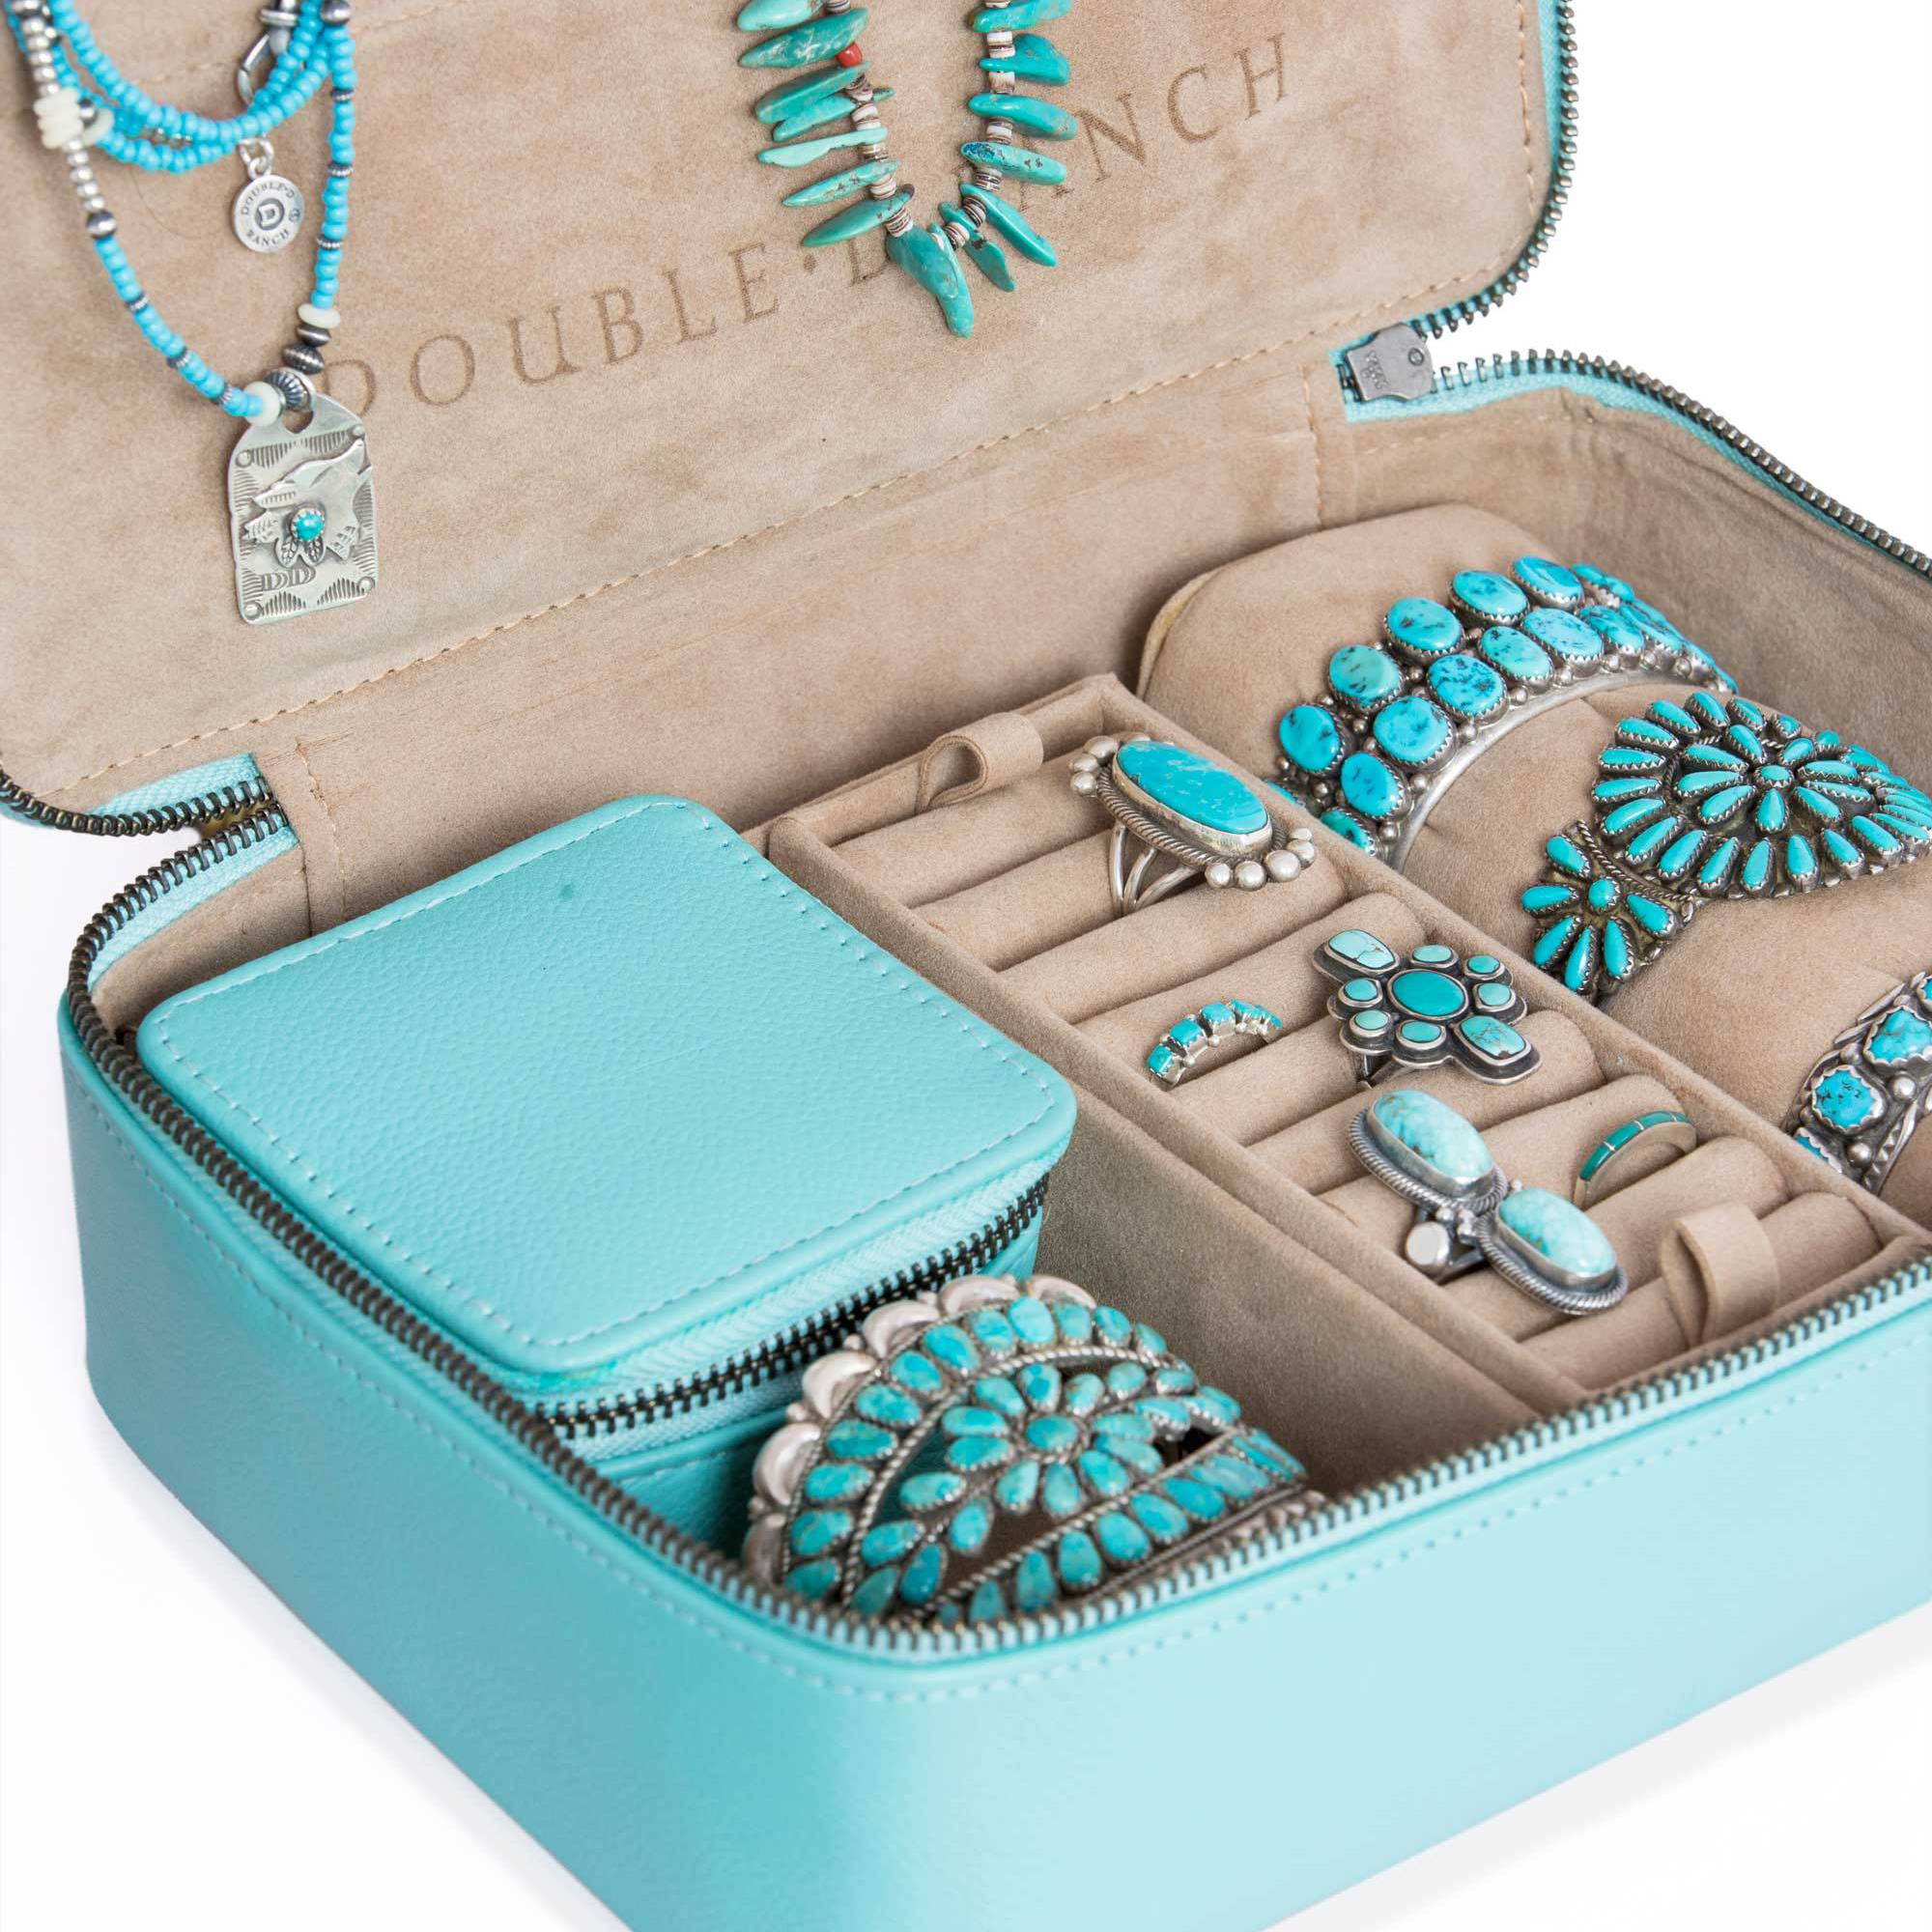 Jewelry Cases are Back!